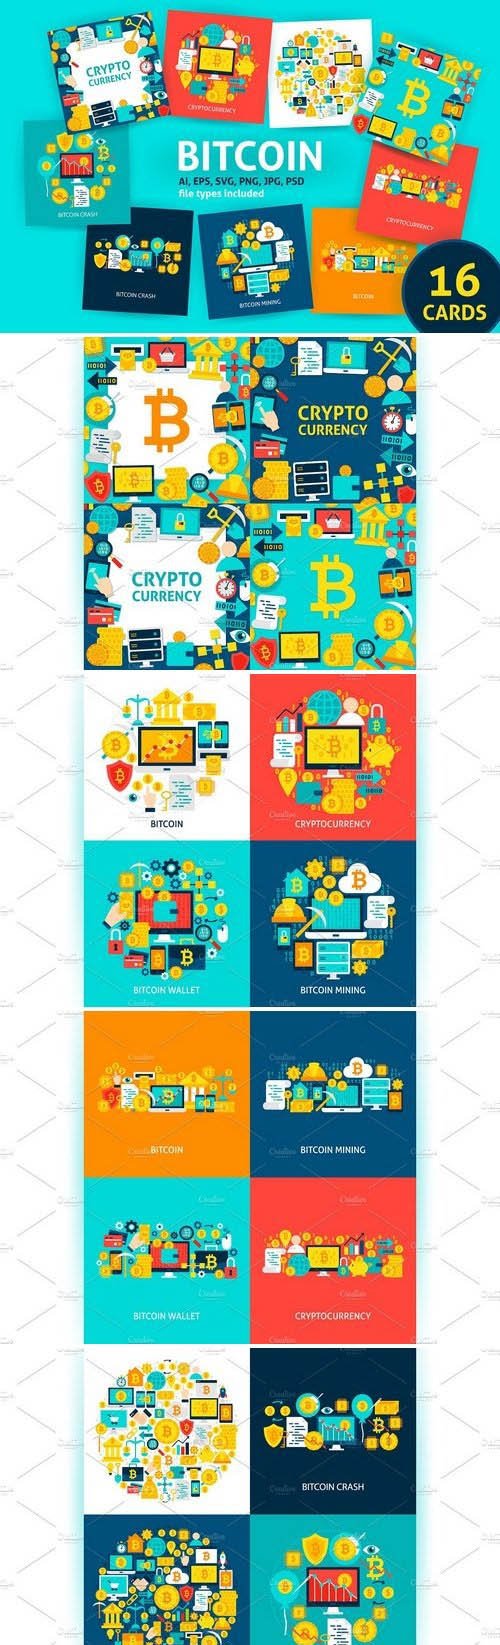 CM - Bitcoin Cryptocurrency Concepts 2159409